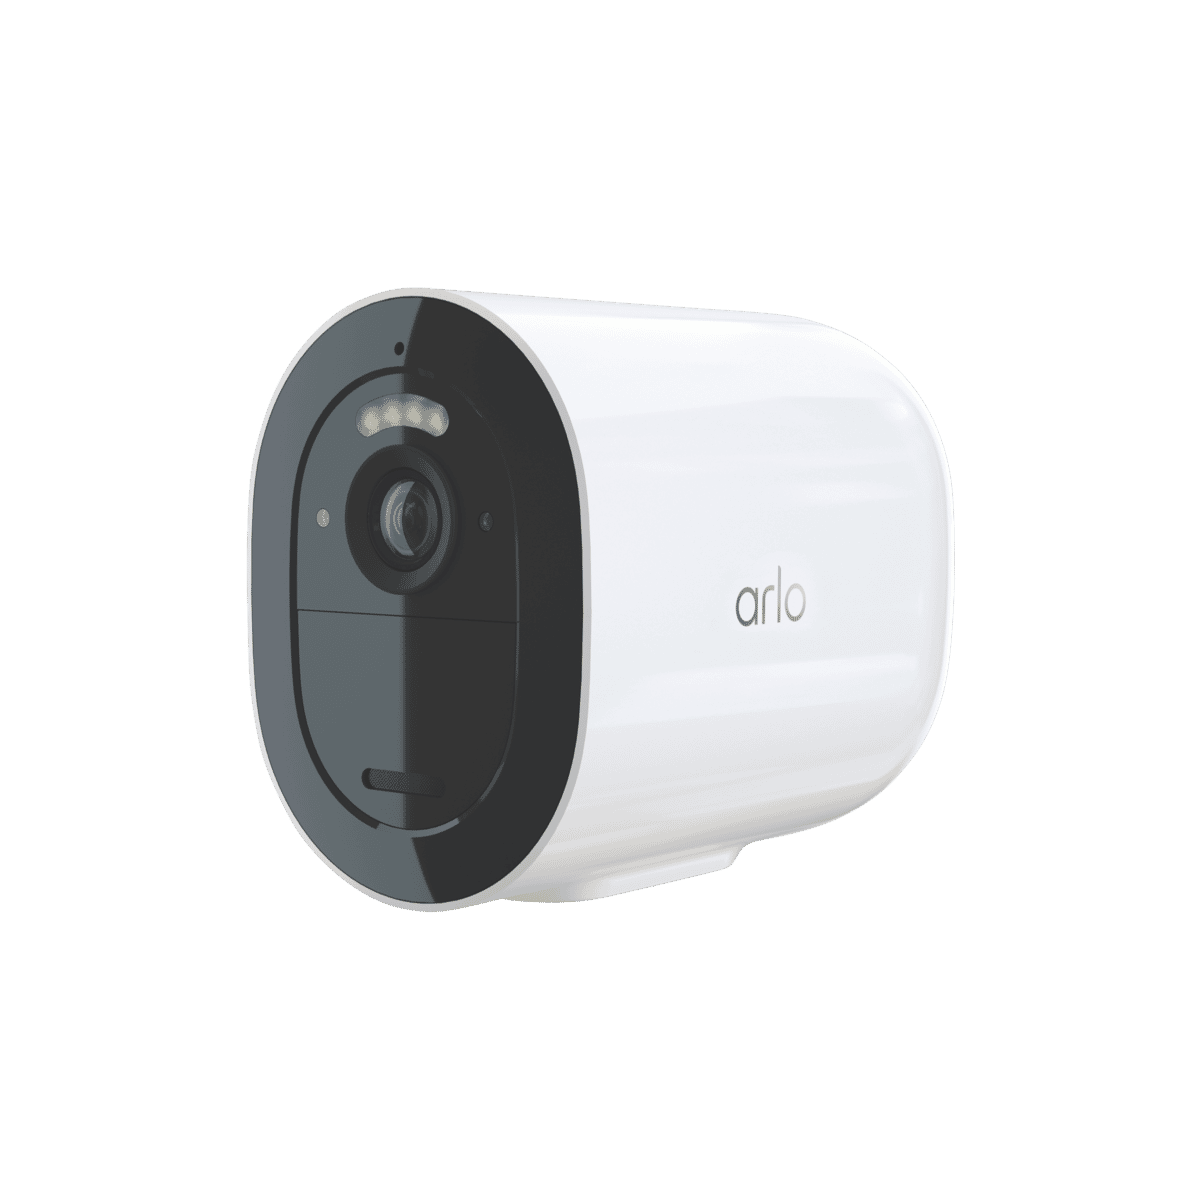 VML2030-100AUS Go 2 4G & Wi-Fi Mobile Security Camera at The Guys